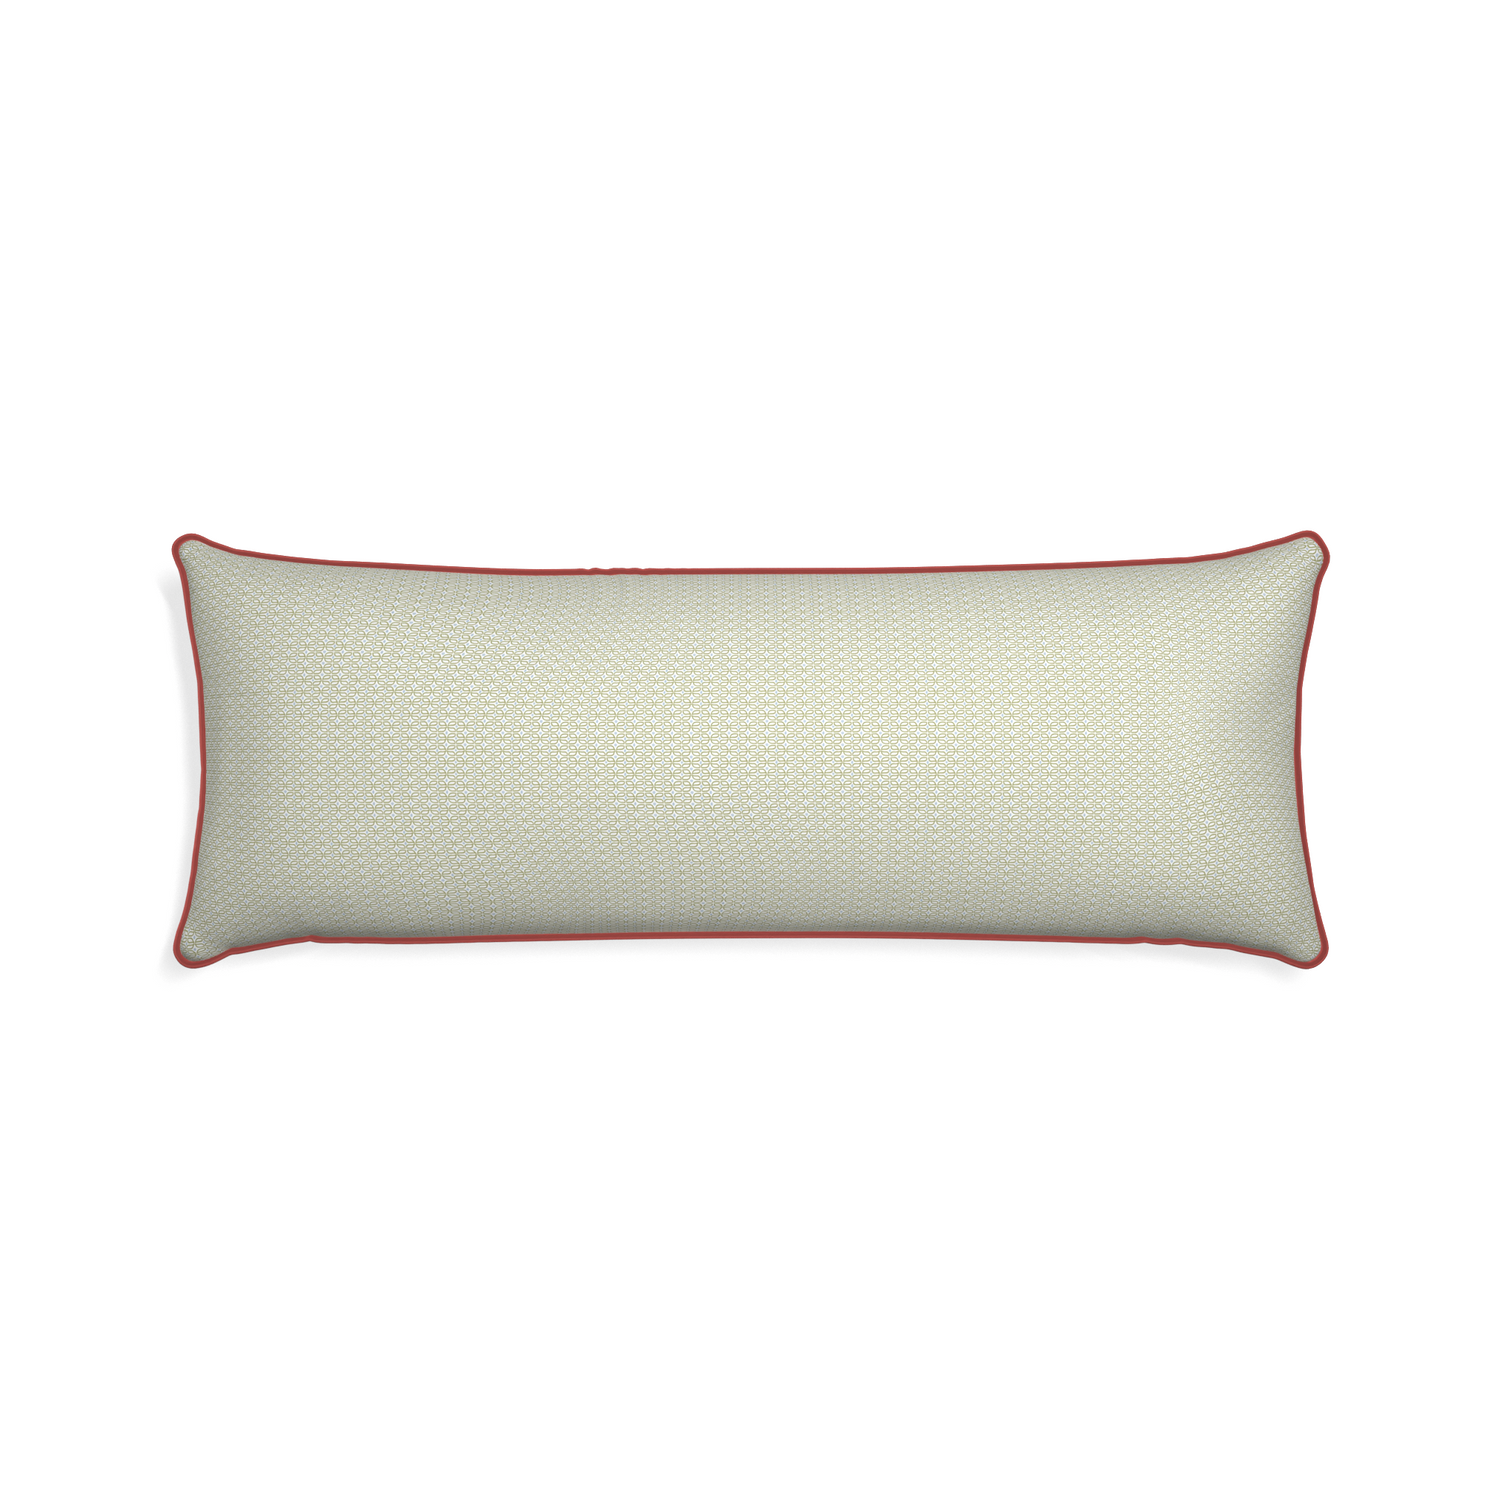 Xl-lumbar loomi moss custom pillow with c piping on white background